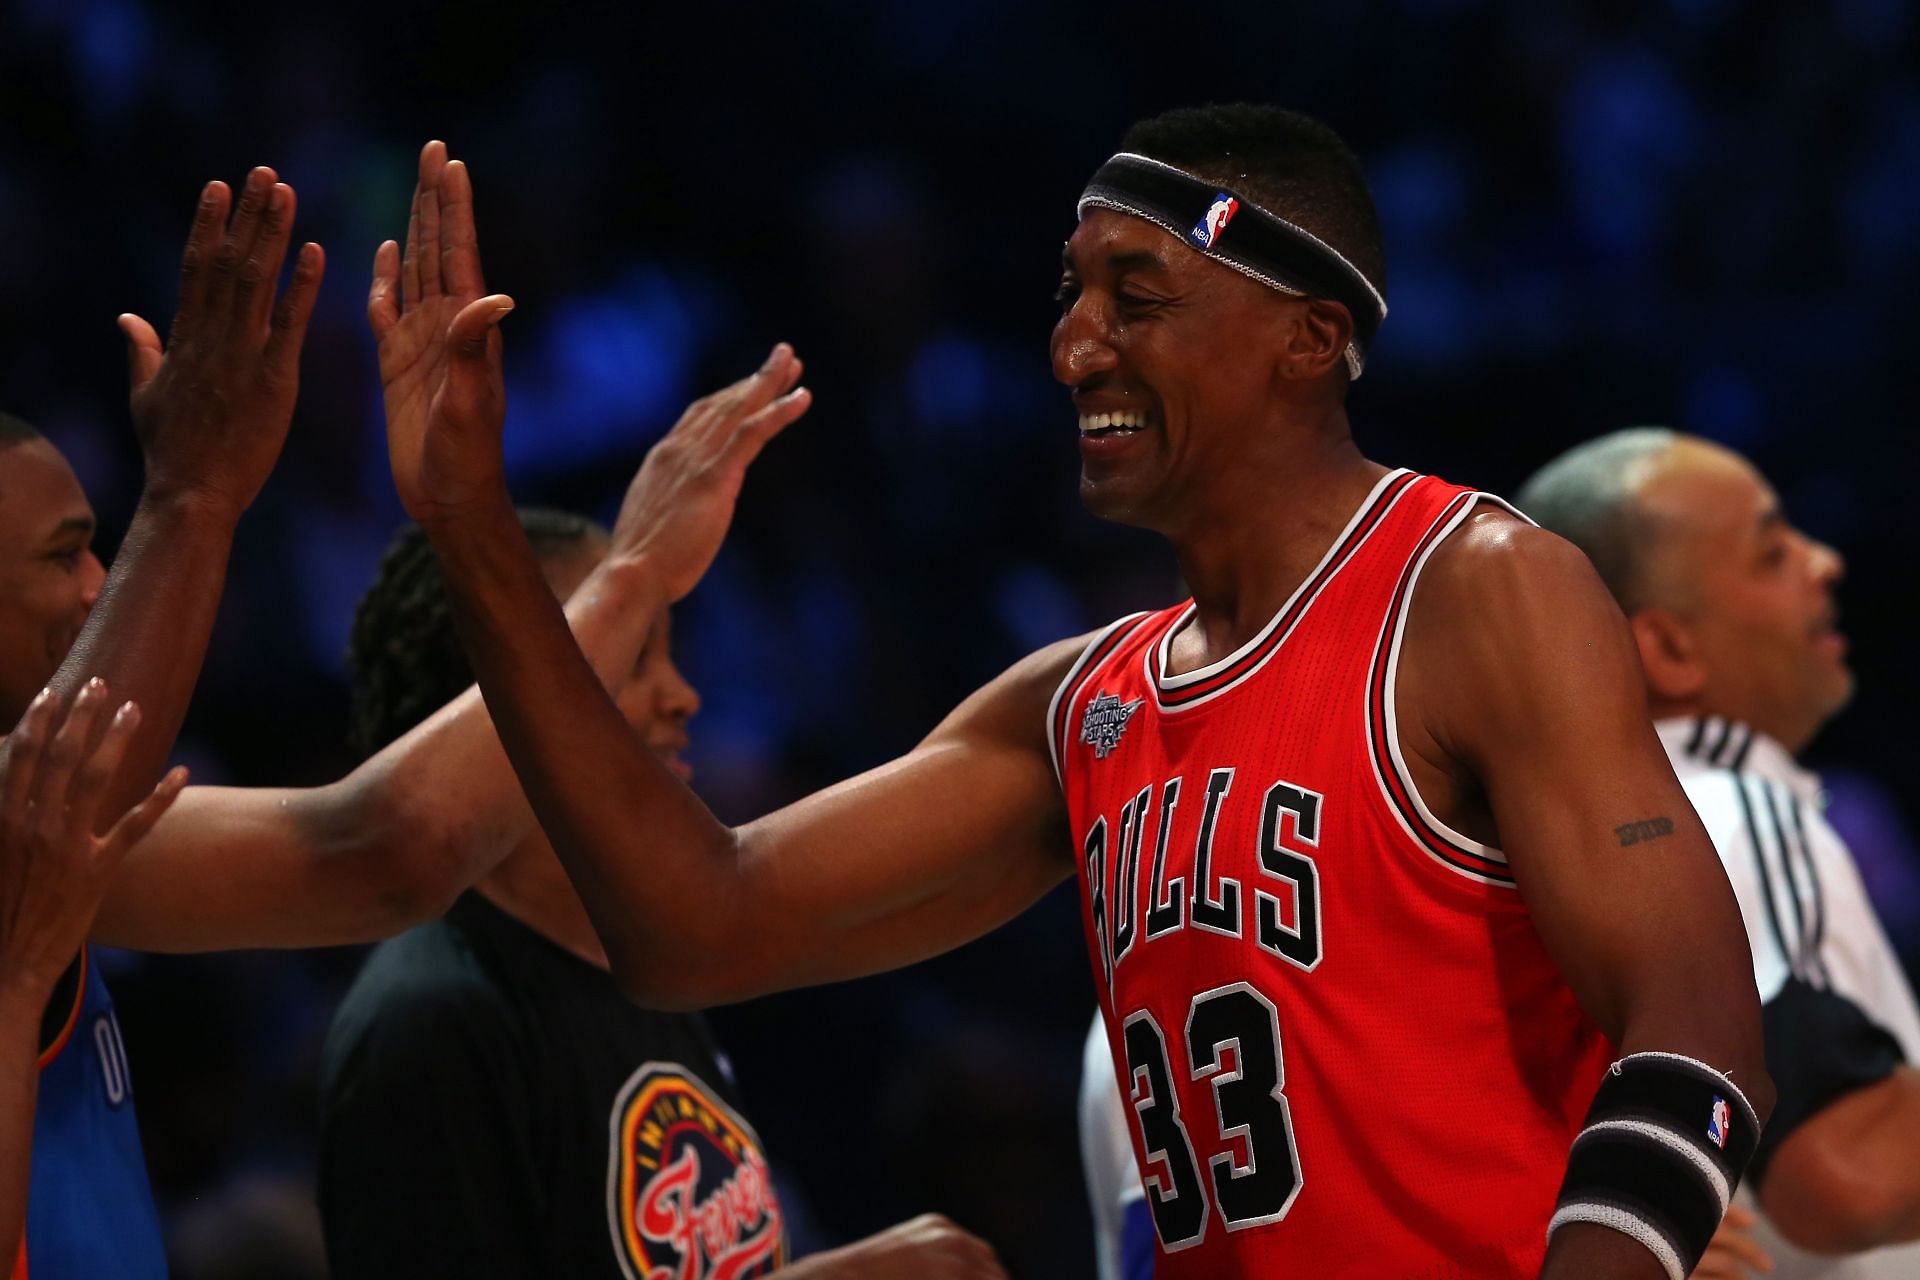 NBA Legend Scottie Pippen #33 high-fives during the Degree Shooting Stars Competition as part of the 2015 NBA Allstar Weekend at Barclays Center on February 14, 2015, in the Brooklyn borough of New York City